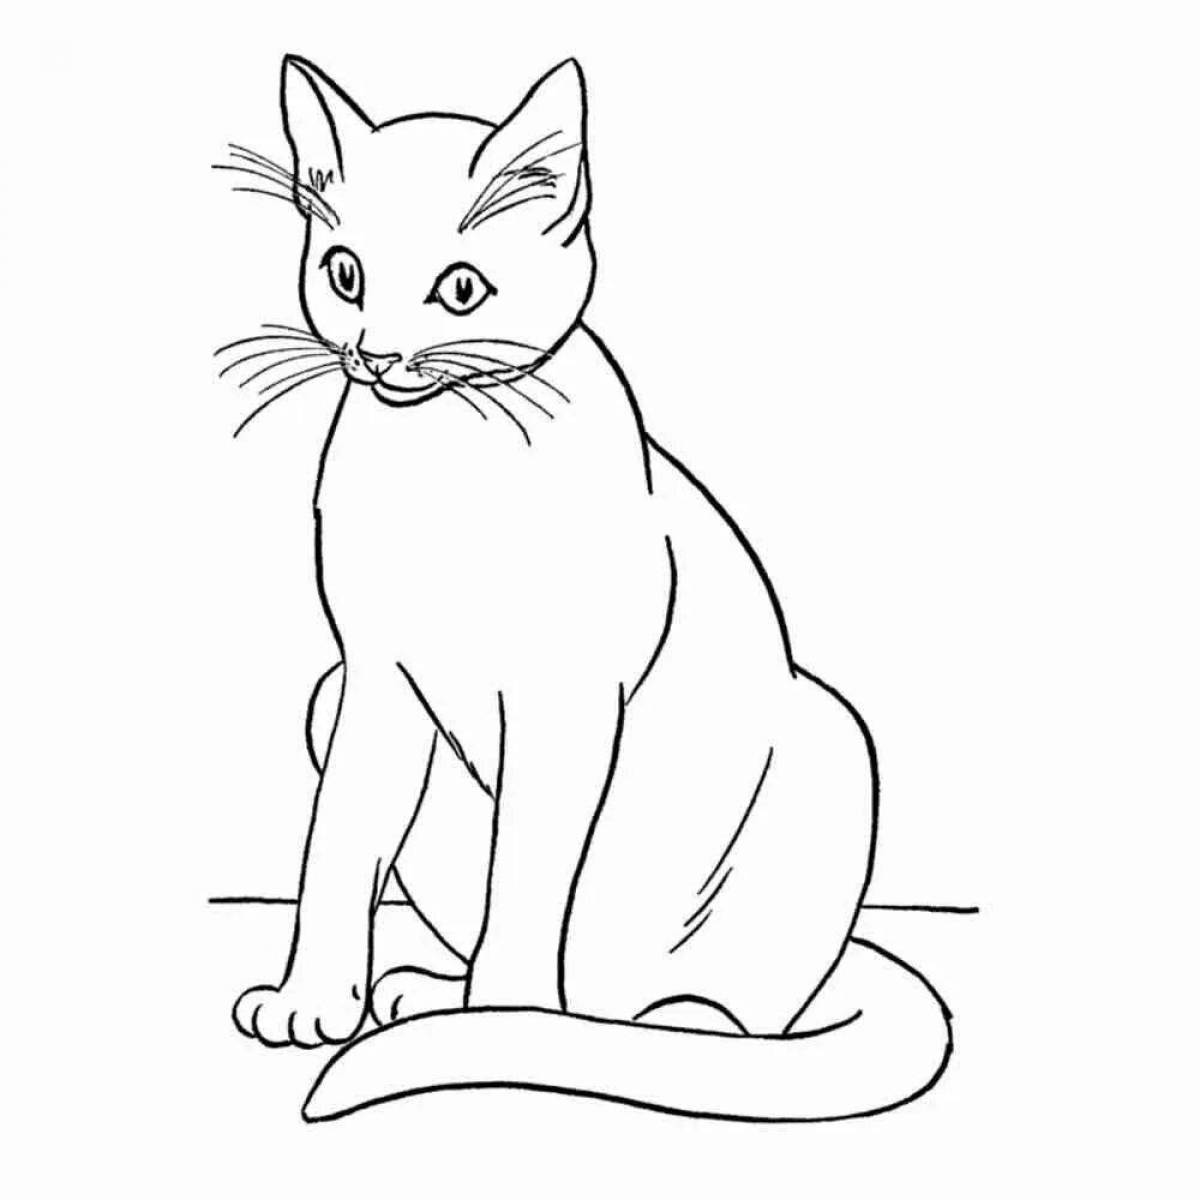 Bright big cat coloring page